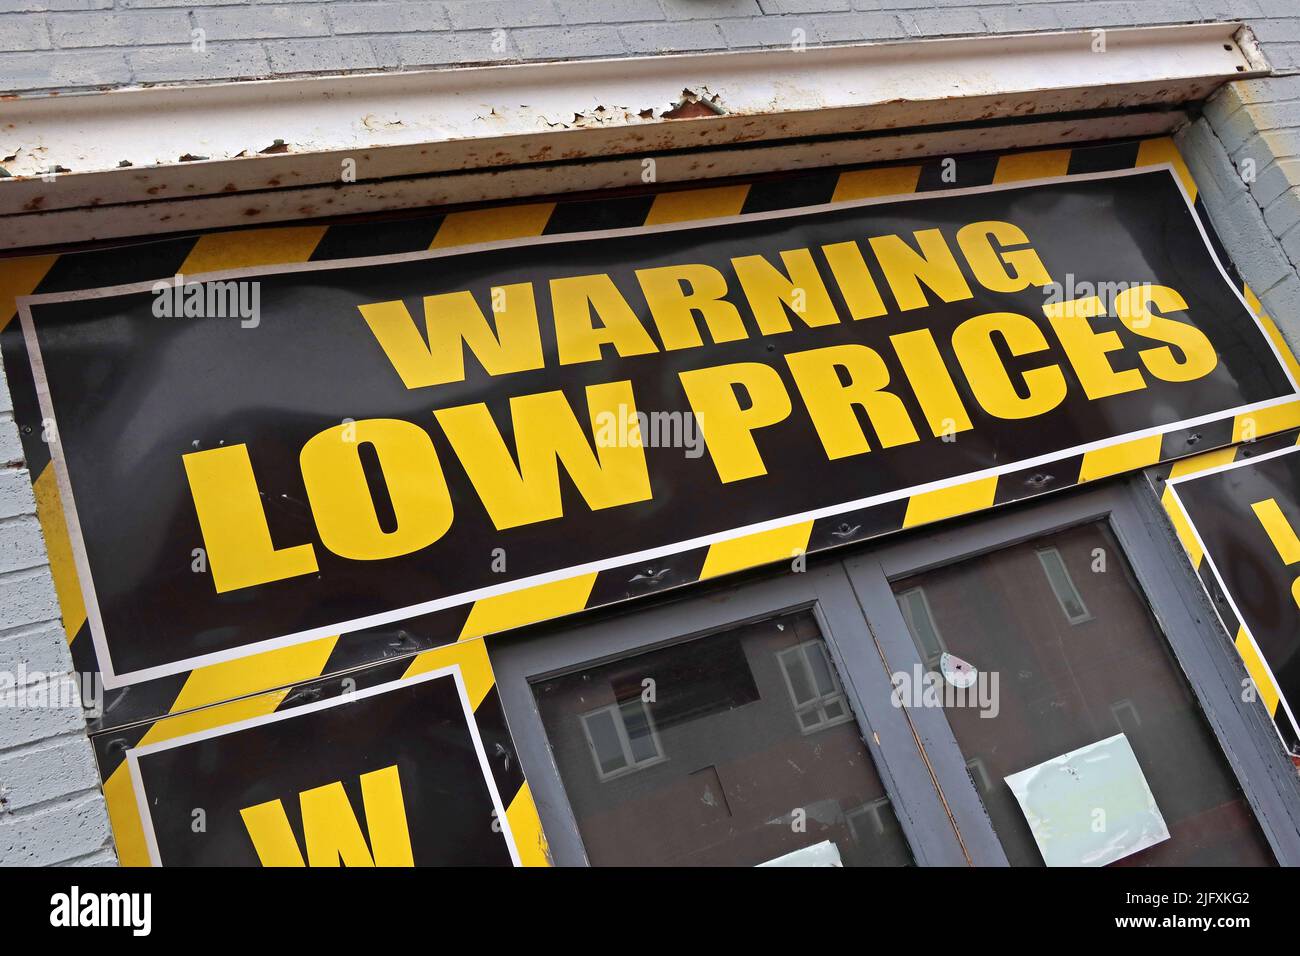 Warning Low Prices sign, shop in Warrington, Cheshire, England, UK Stock Photo